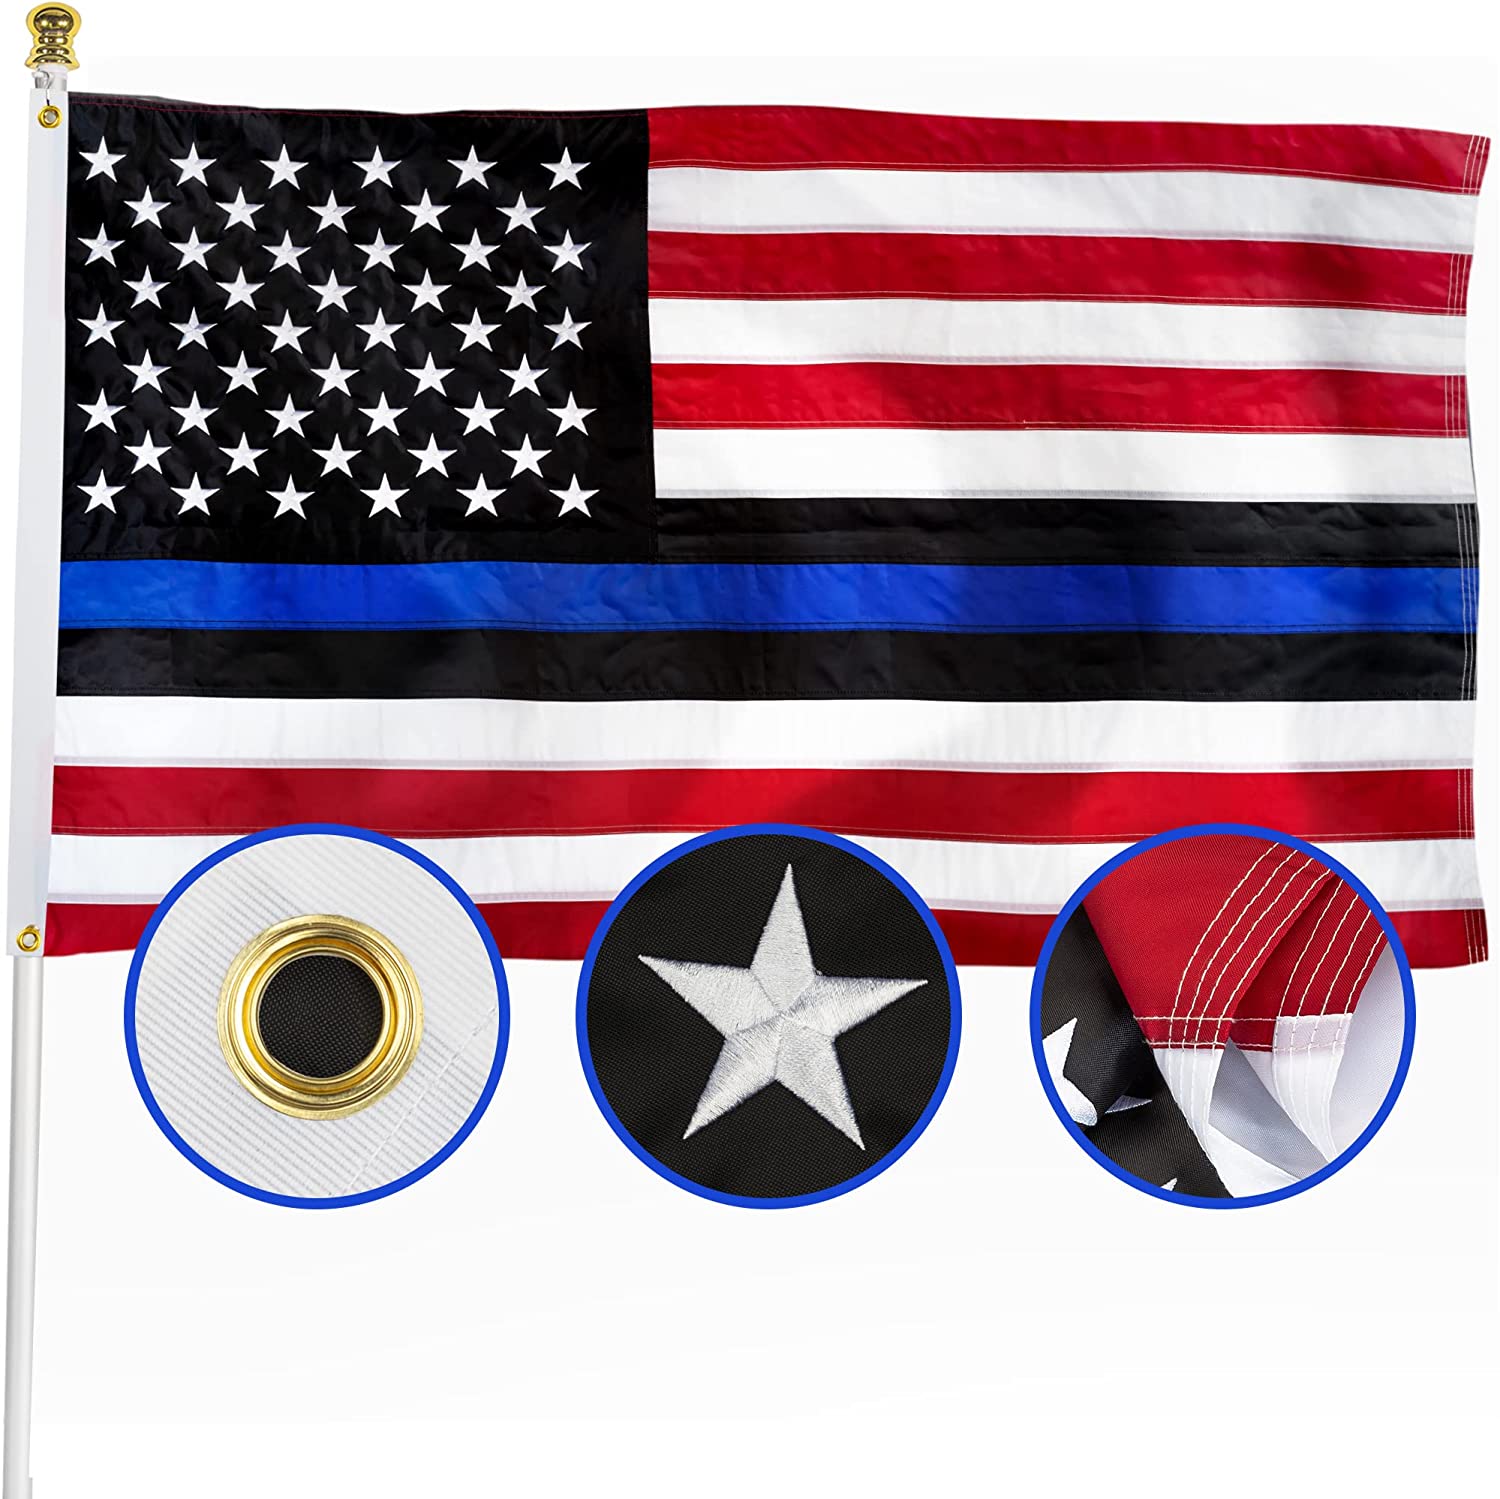 1 embroidery flag of blue lives matter